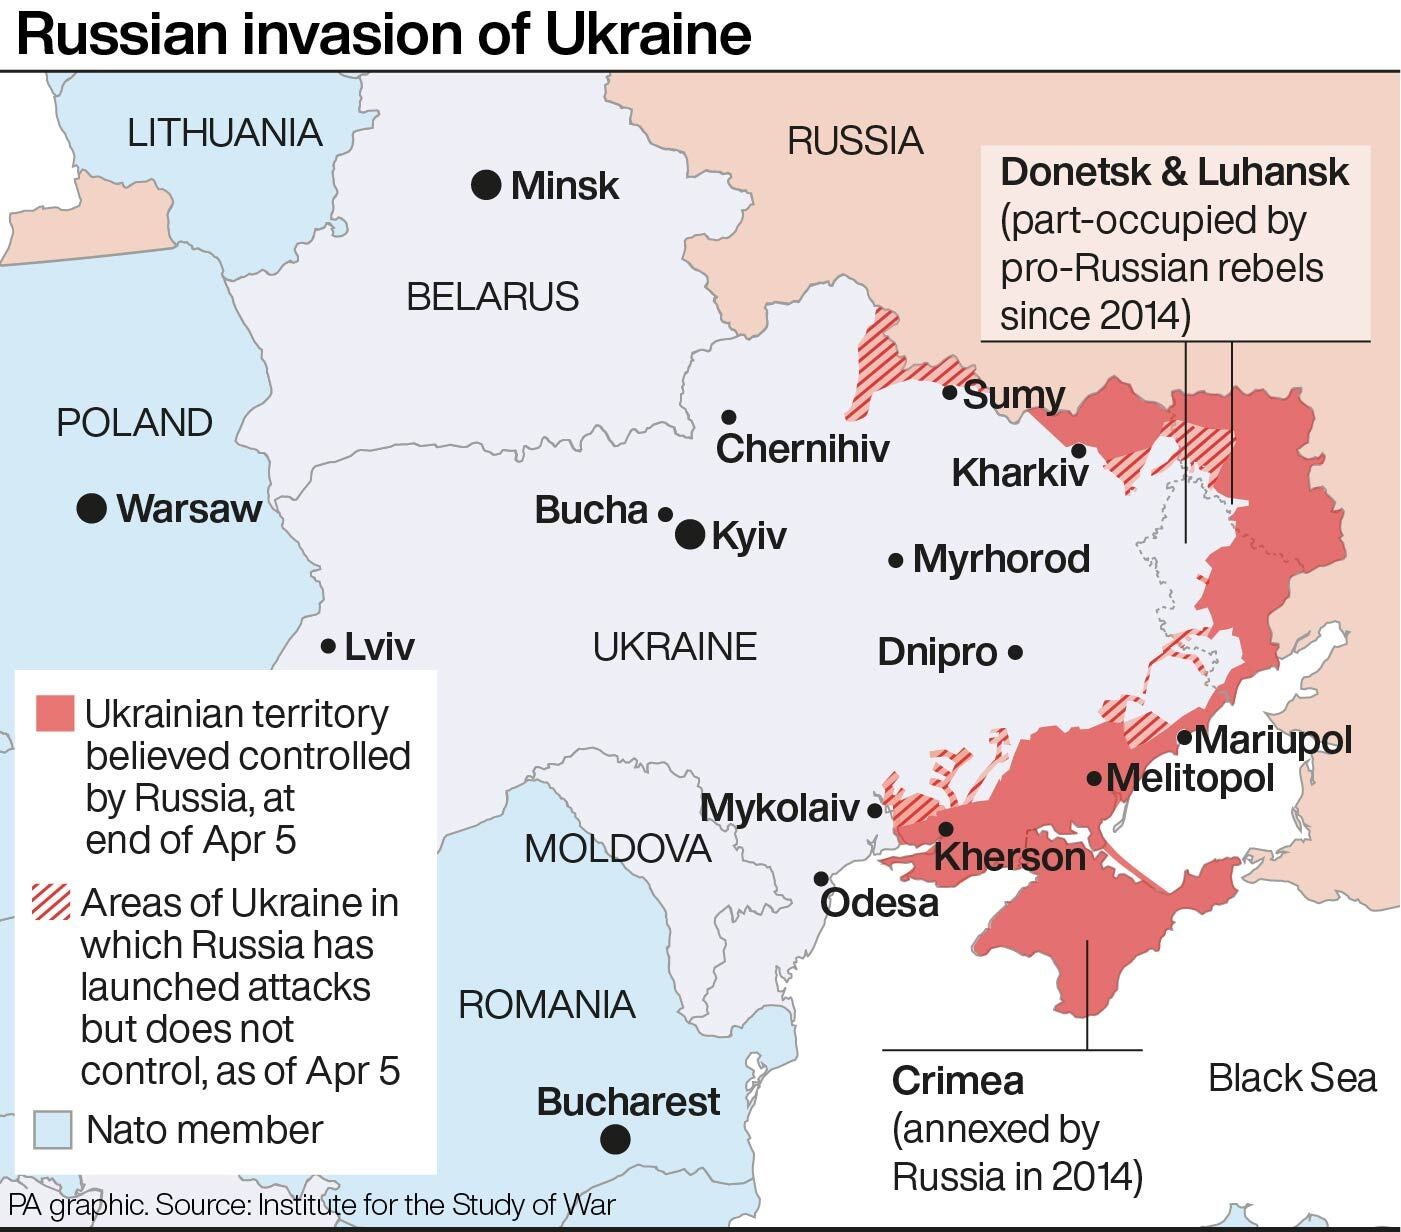 The extent of the Russian invasion of Ukraine